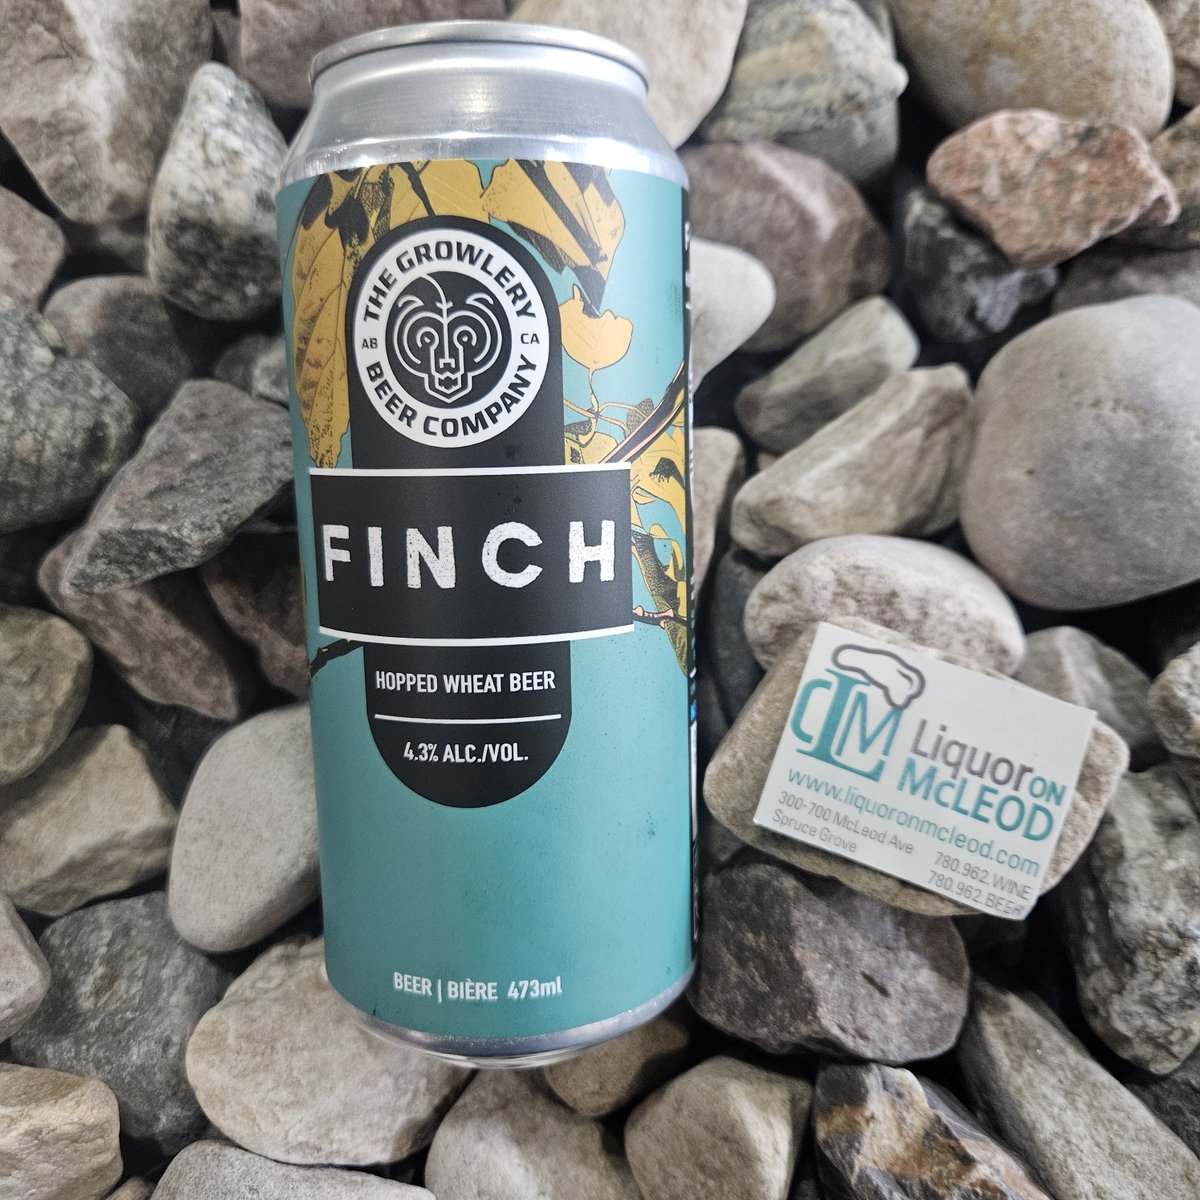 Finch from @growlerybeer combines the crispness of wheat with a delightful burst of hops. #sprucegrove #stonyplain #thegrowlery #liquoronmcleod